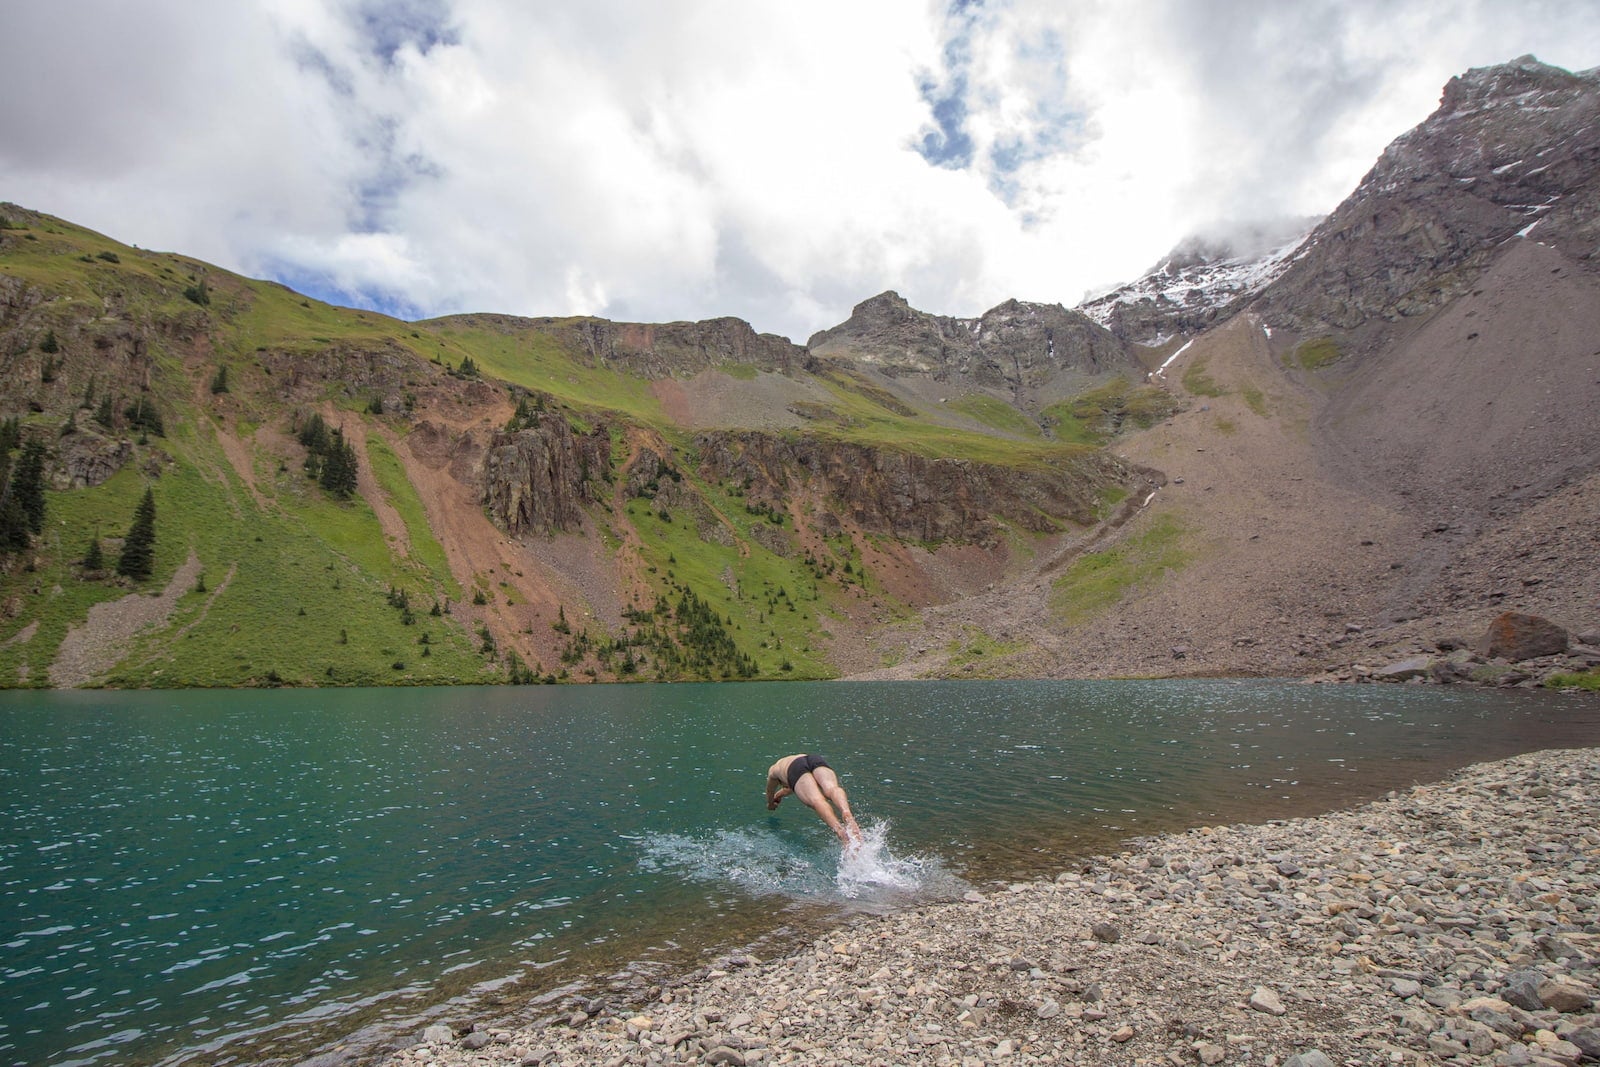 Person jumping into alpine lake in Colorado below snow dusted mountains.